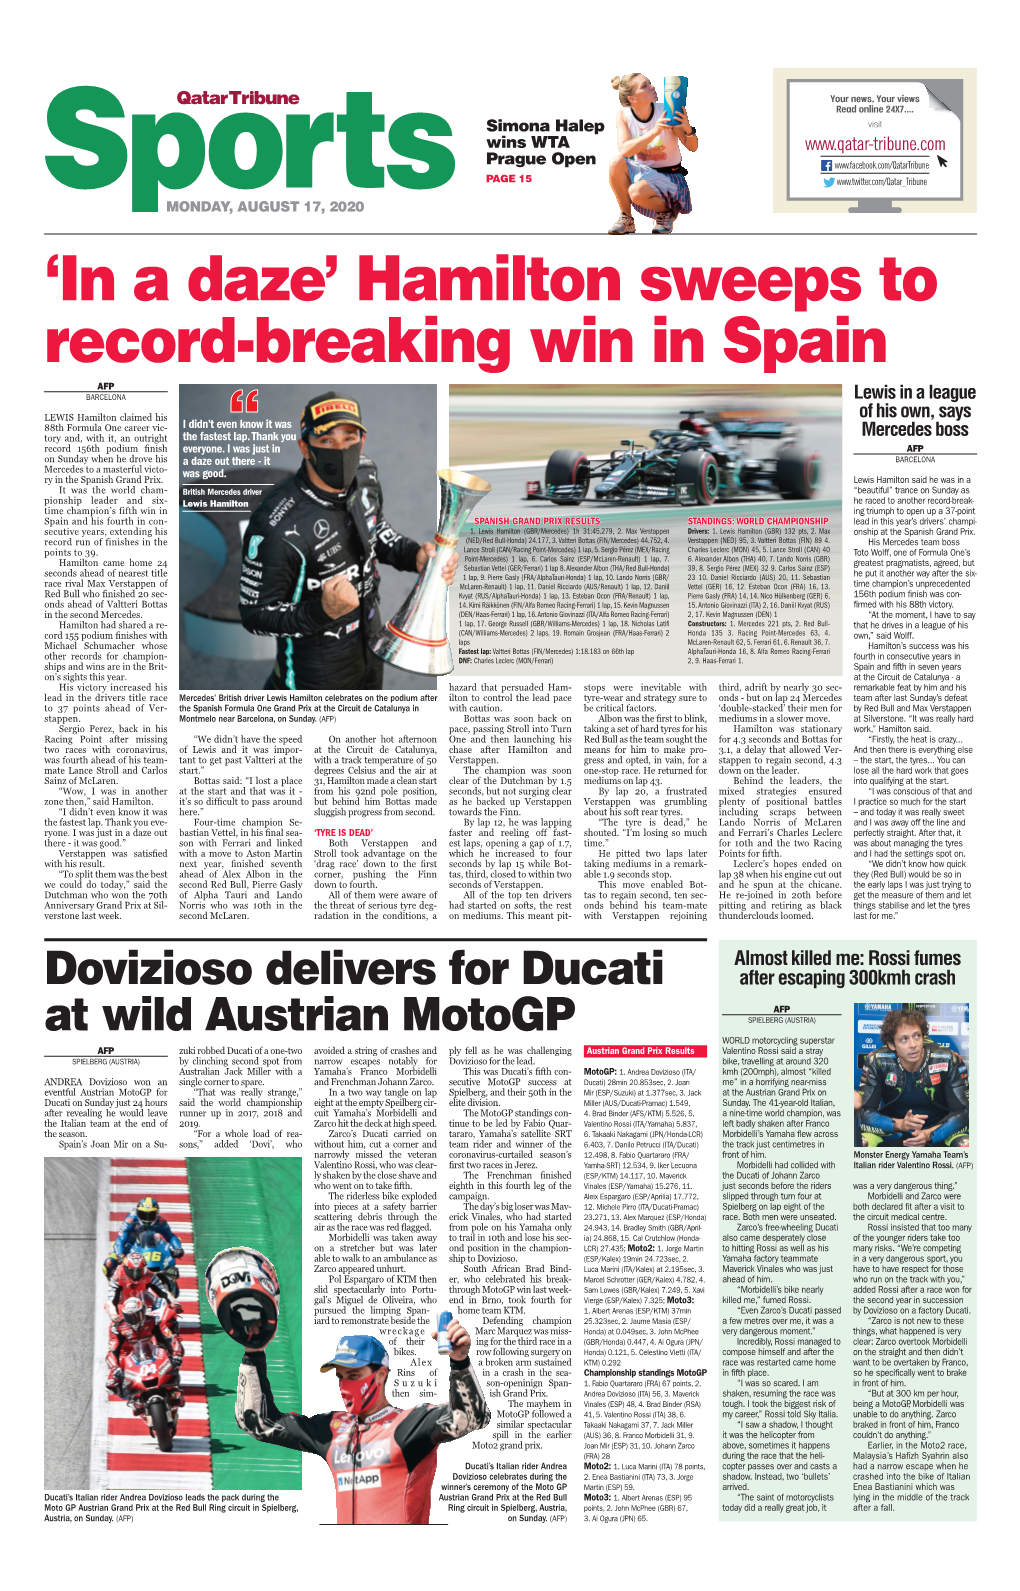 Hamilton Sweeps to Record-Breaking Win in Spain AFP Barcelona Lewis in a League